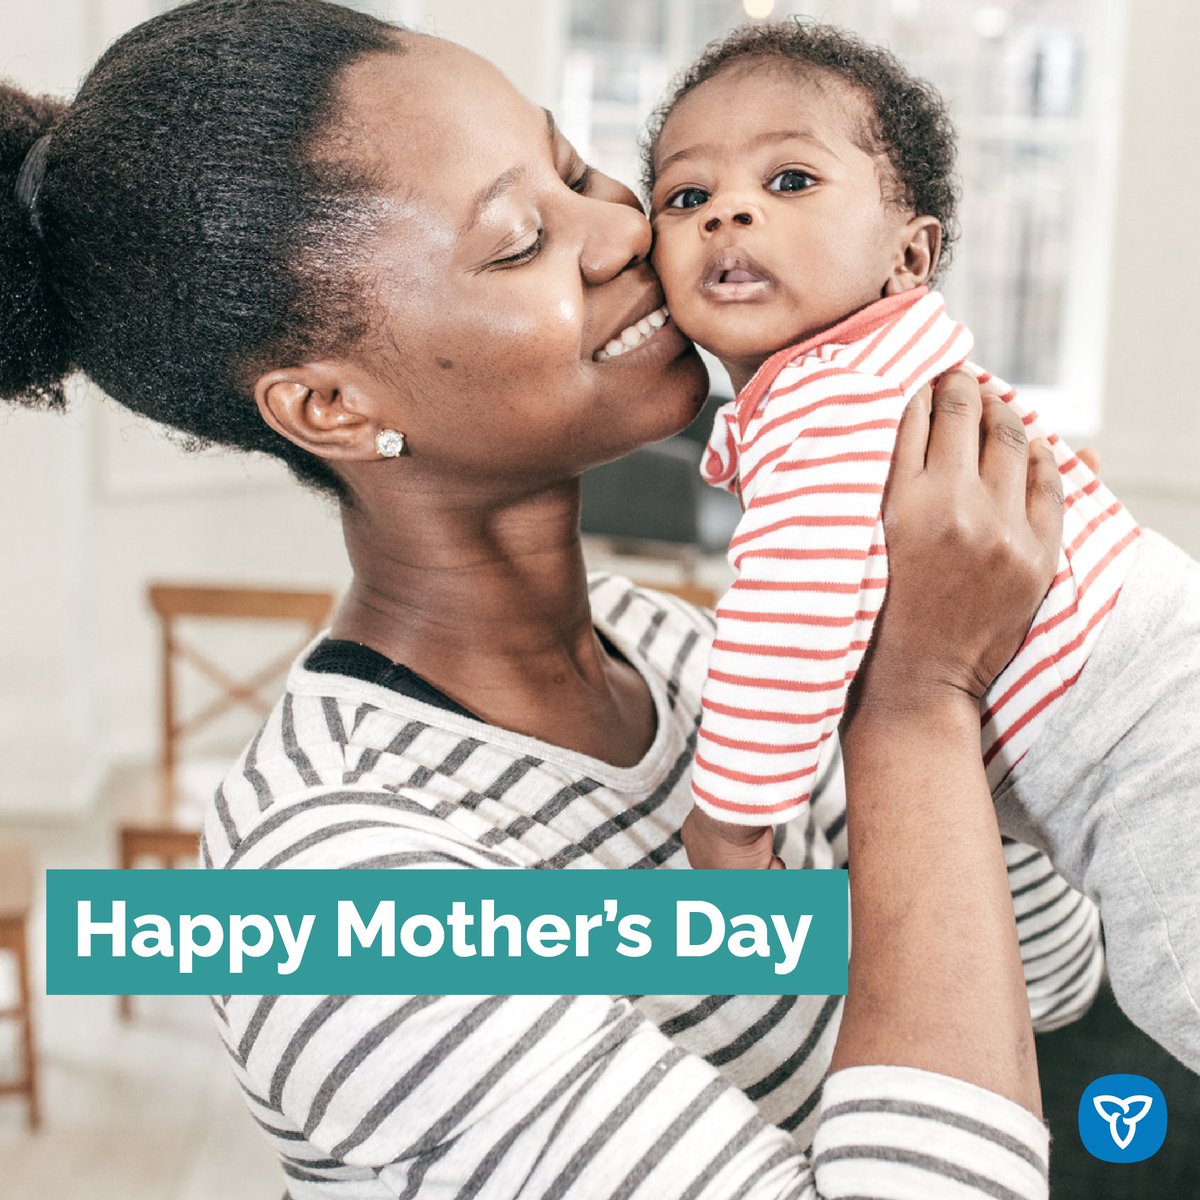 This Sunday is #MothersDay – a chance to celebrate all the hard-working, patient, loving mothers striving to make a difference for their children and families. Thank you for all you do. Share a picture of your mom or another person who inspires you for Mother’s Day. ♥💐🌸🌷